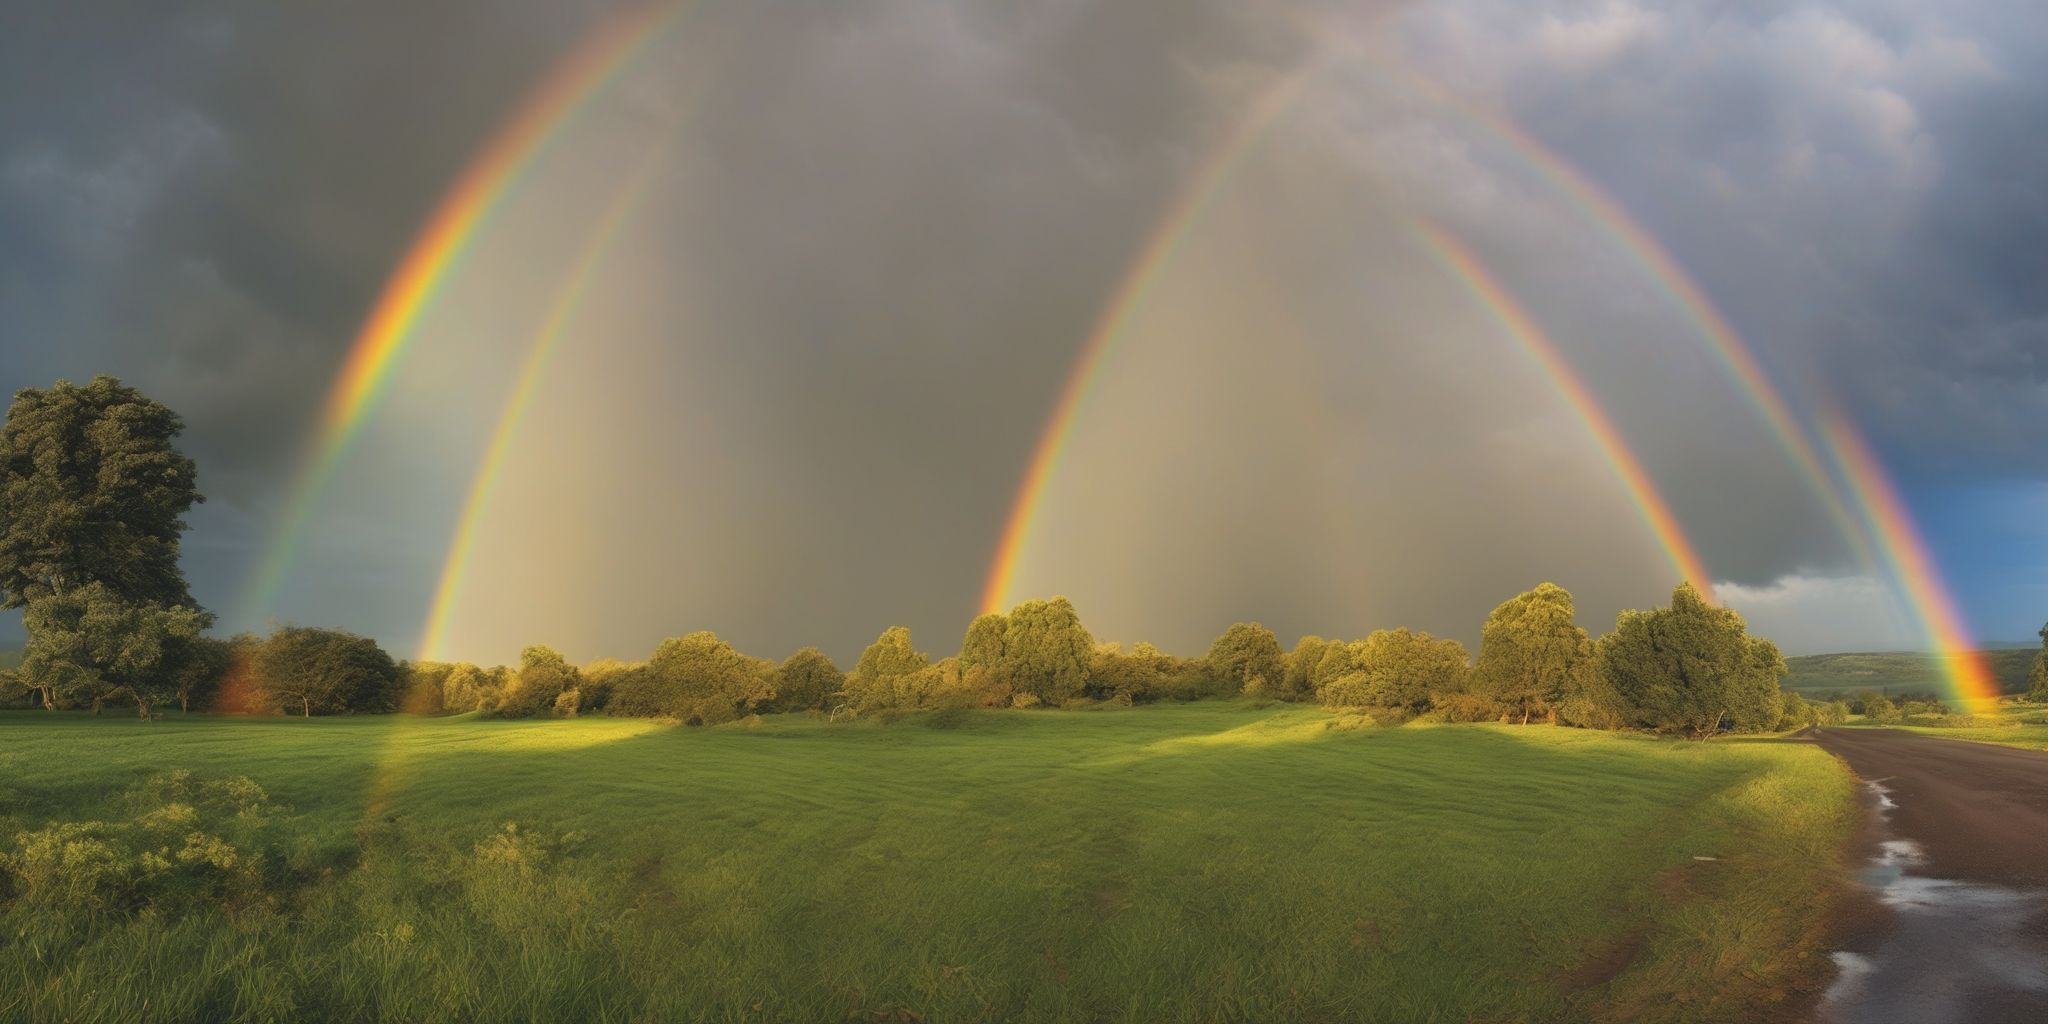 Rainbow  in realistic, photographic style